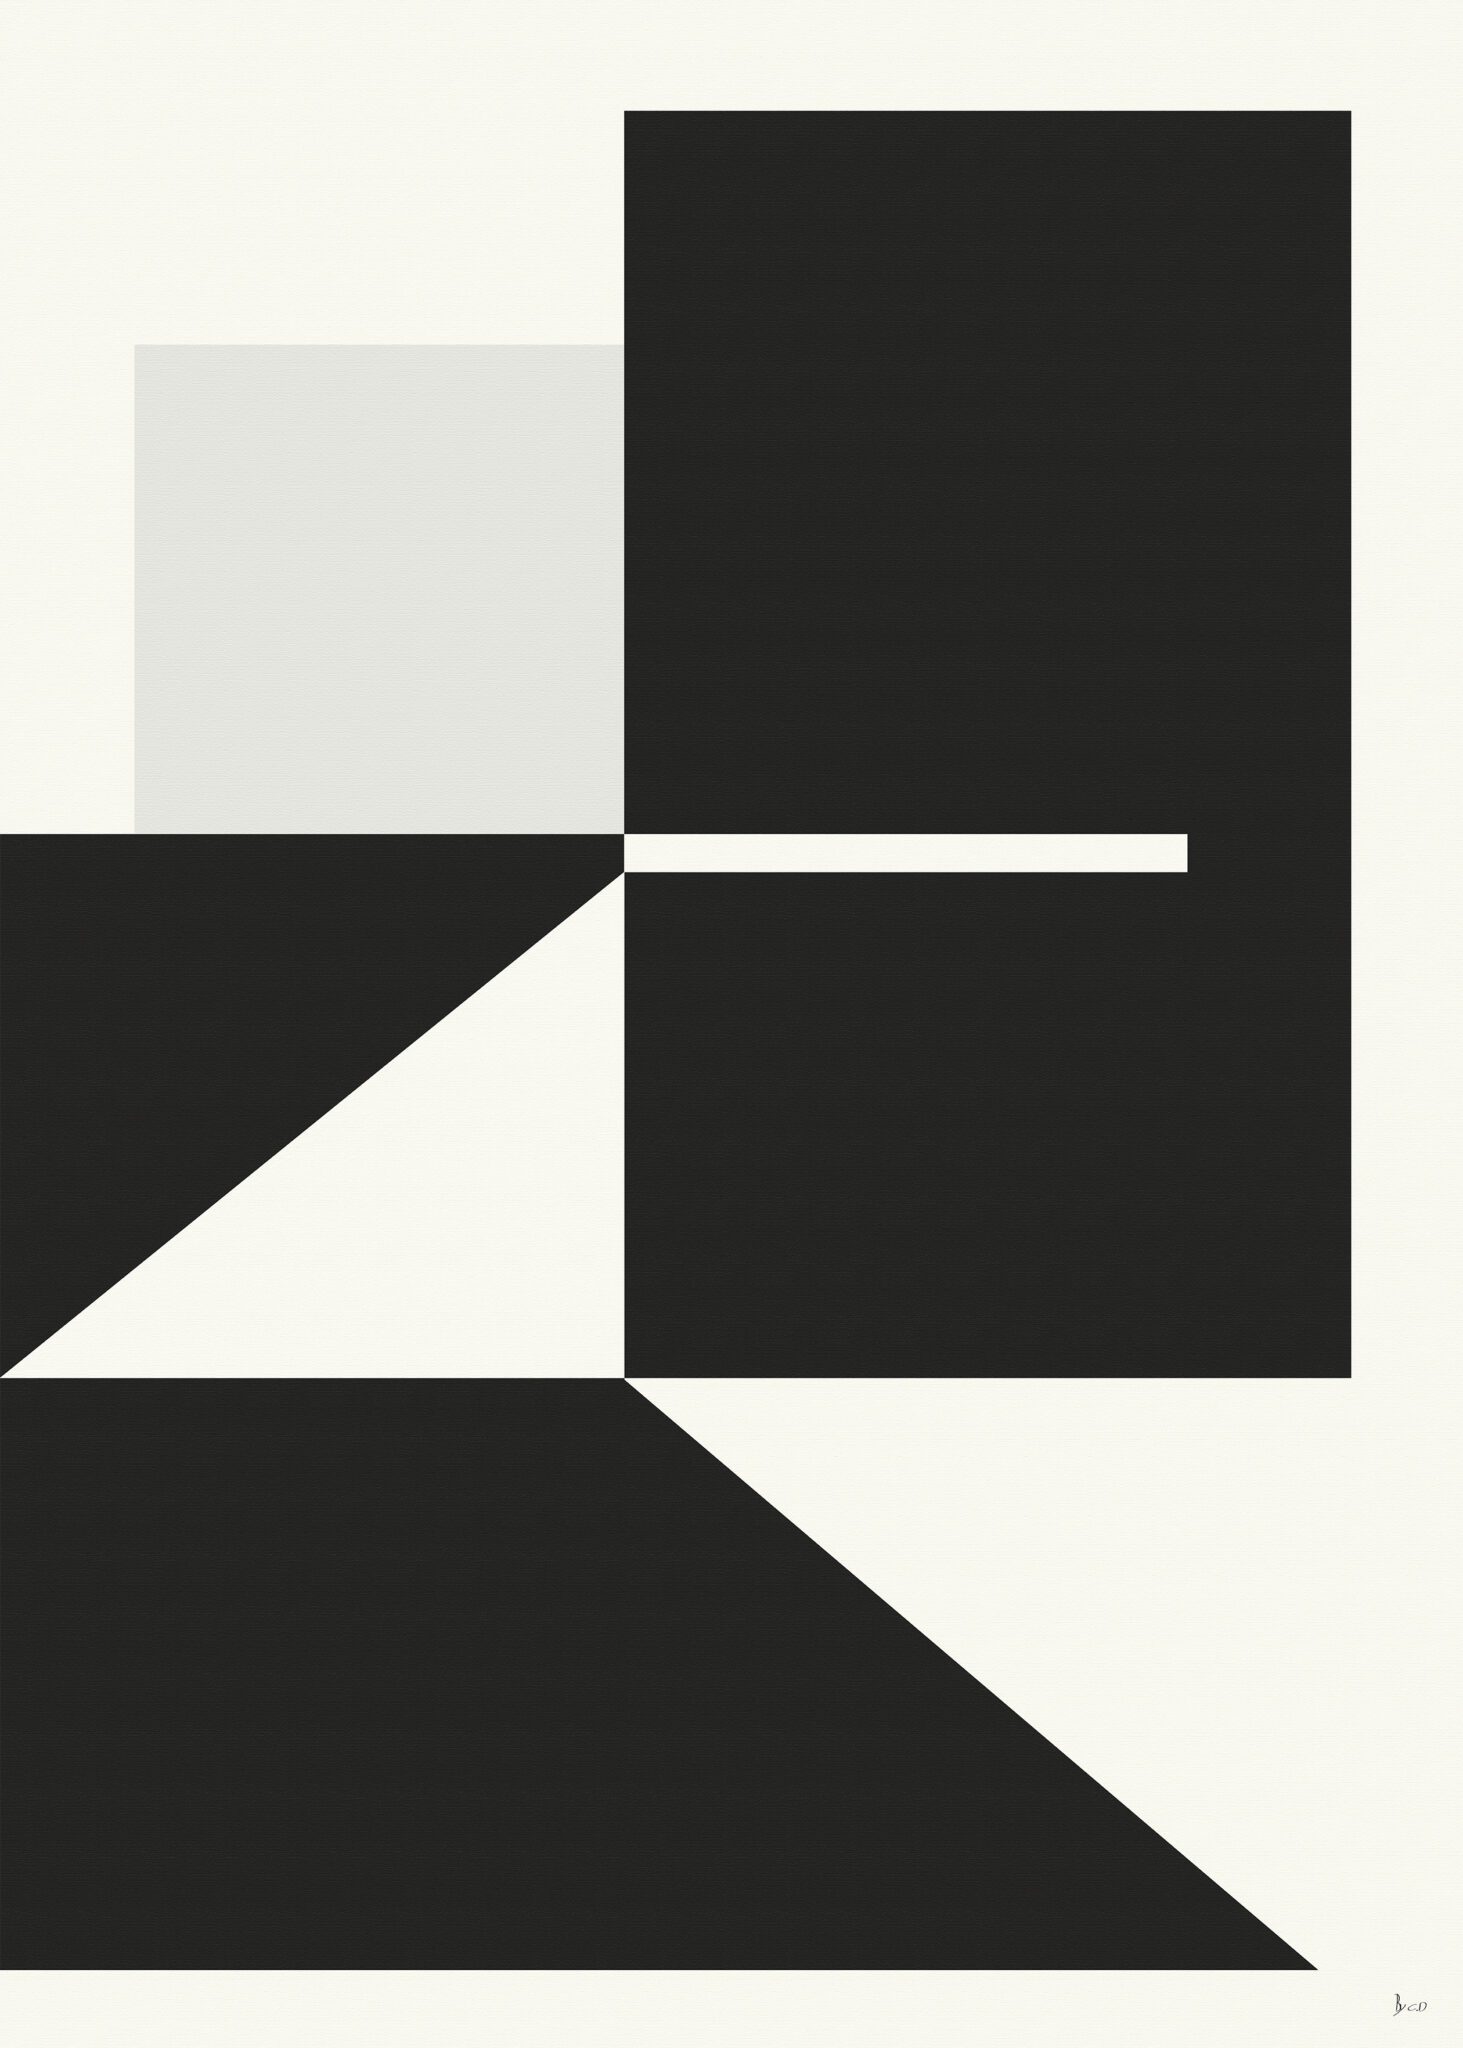 Monochrome abstract art using symmetrical squares and triangles